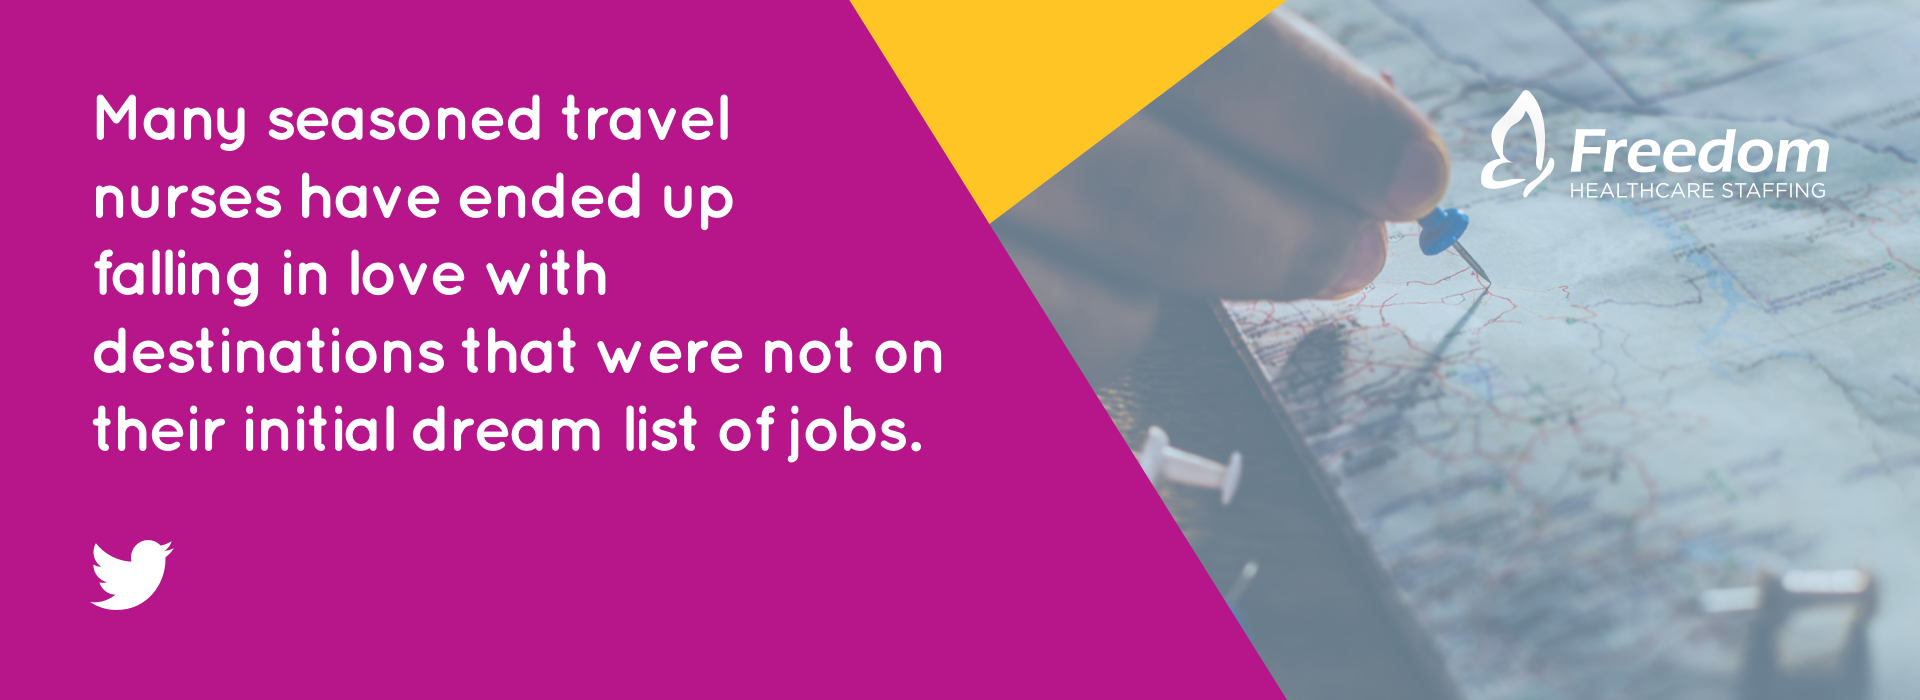 Many seasoned travel nurses have ended up falling in love with destinations that were not on their initial dream list of jobs.